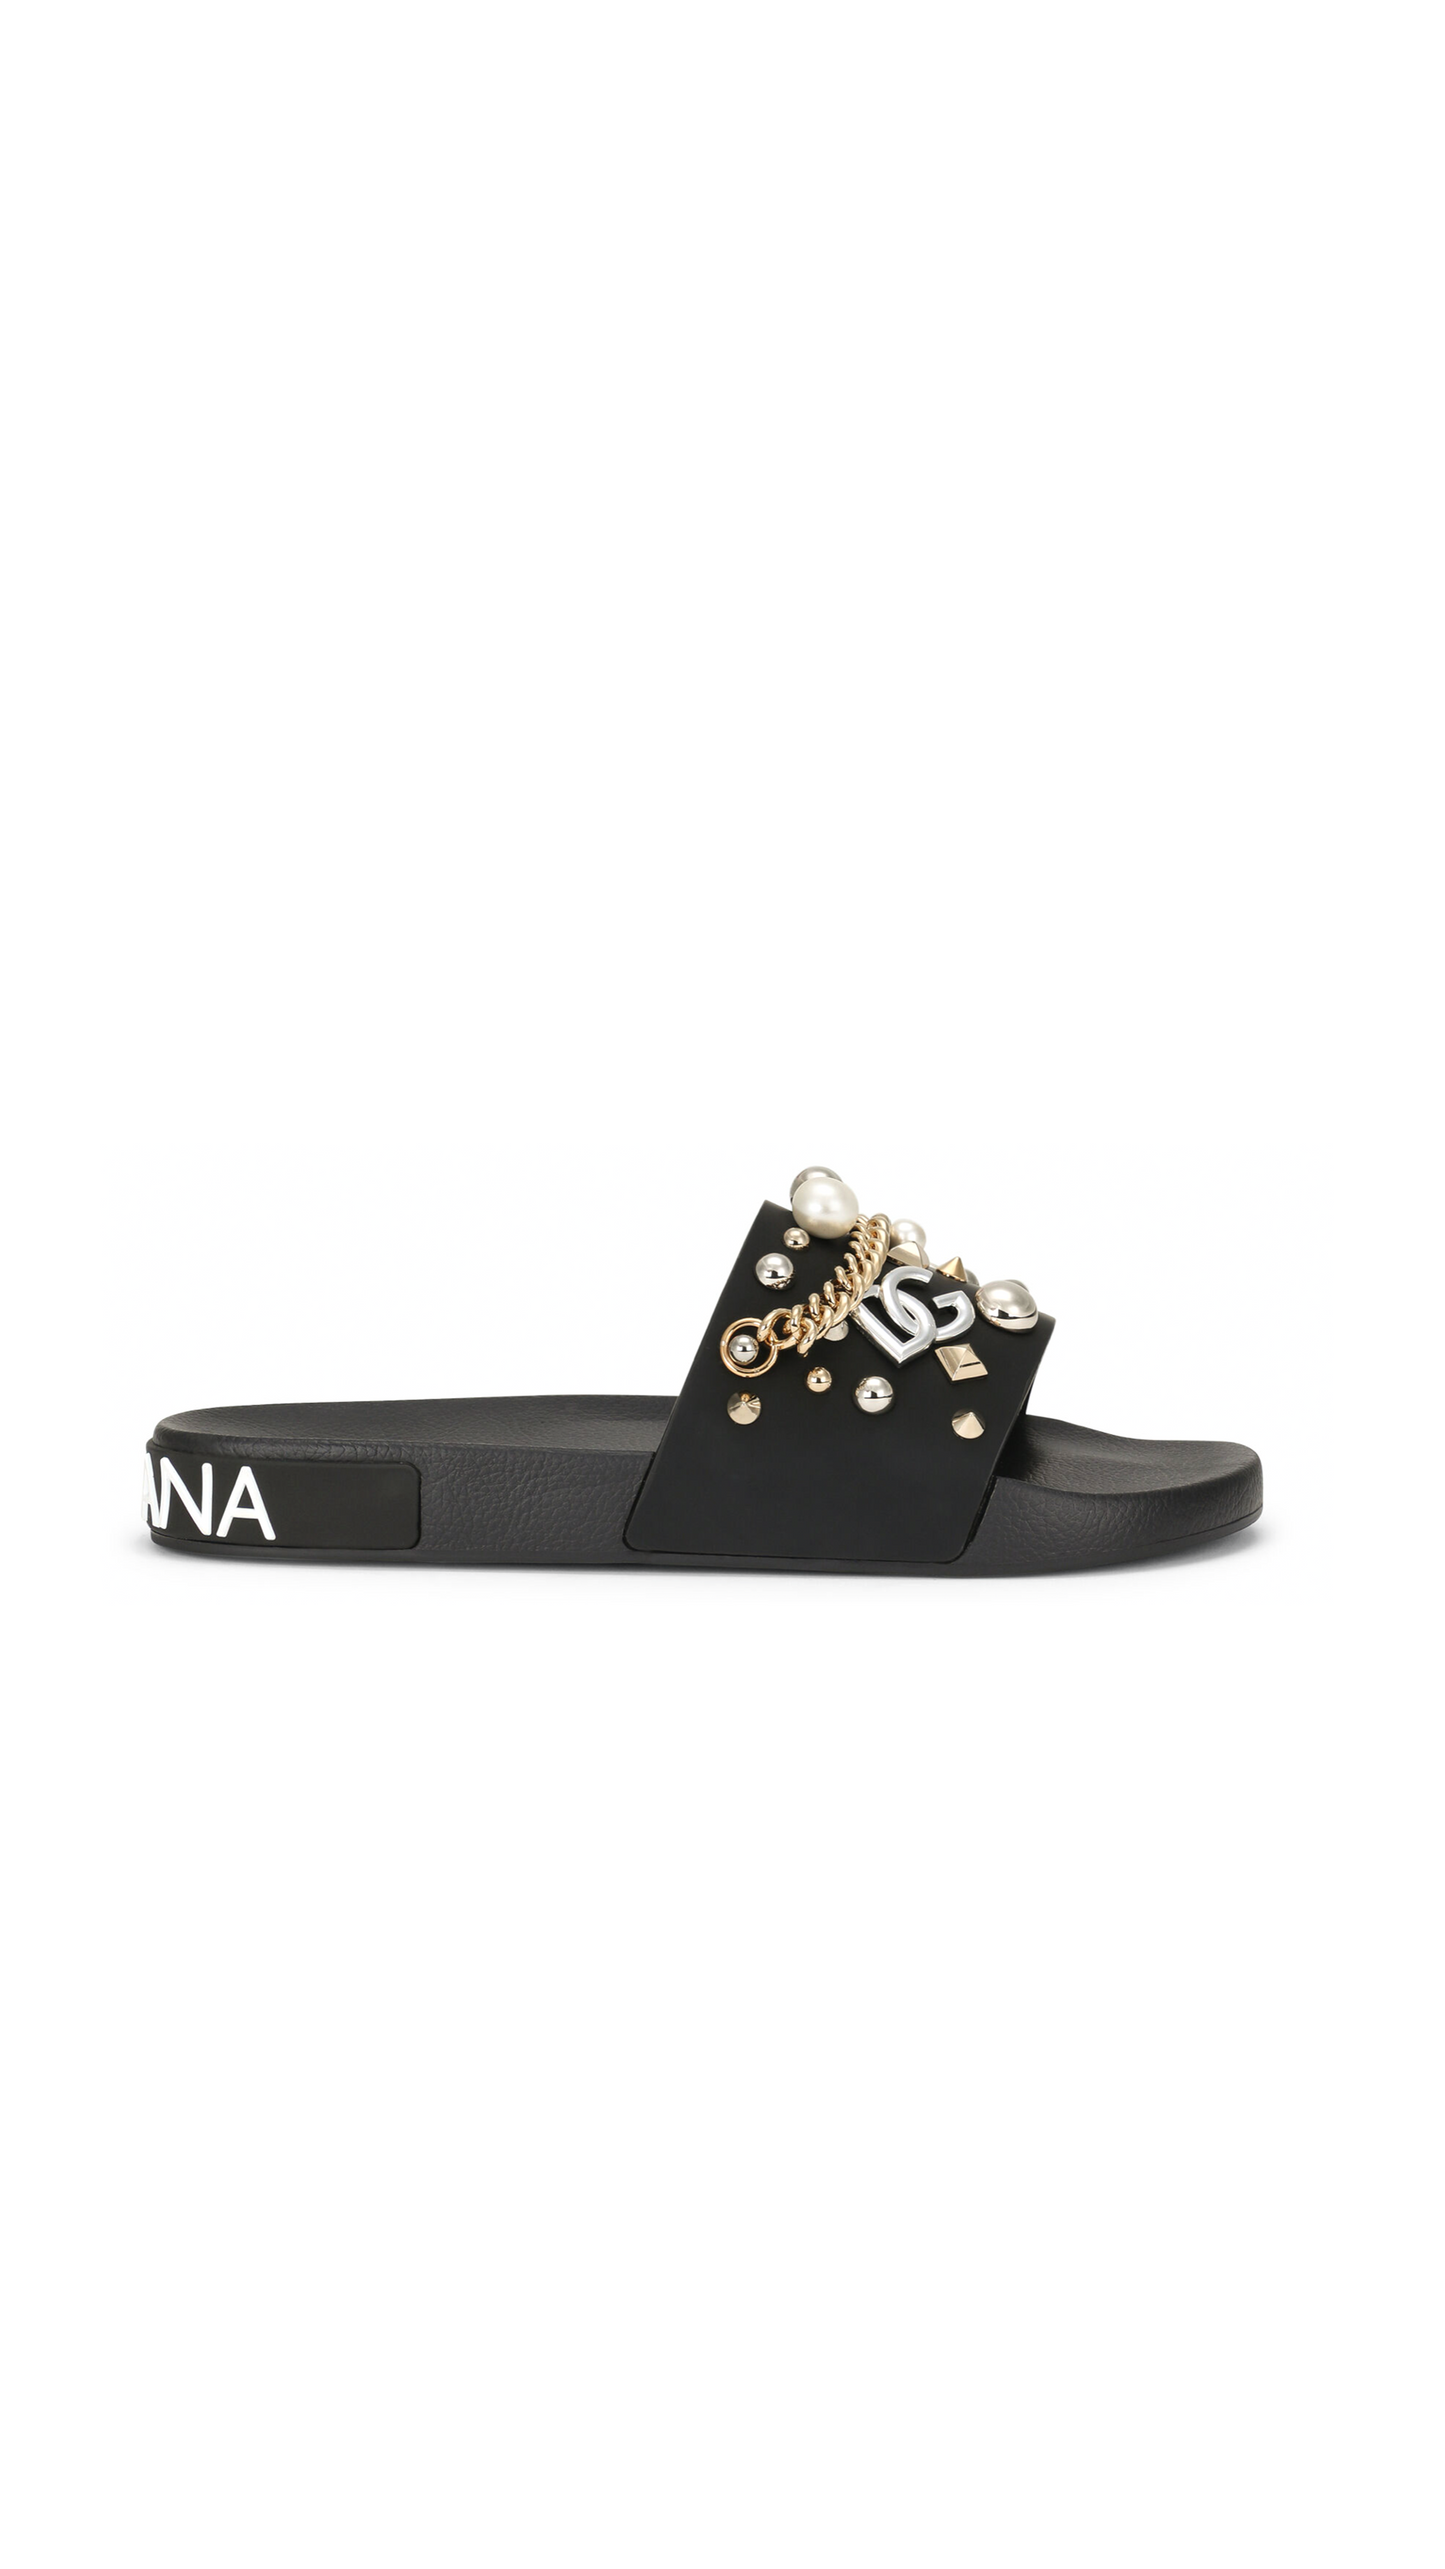 Rubber Beachwear Sliders with Embroidery - Black